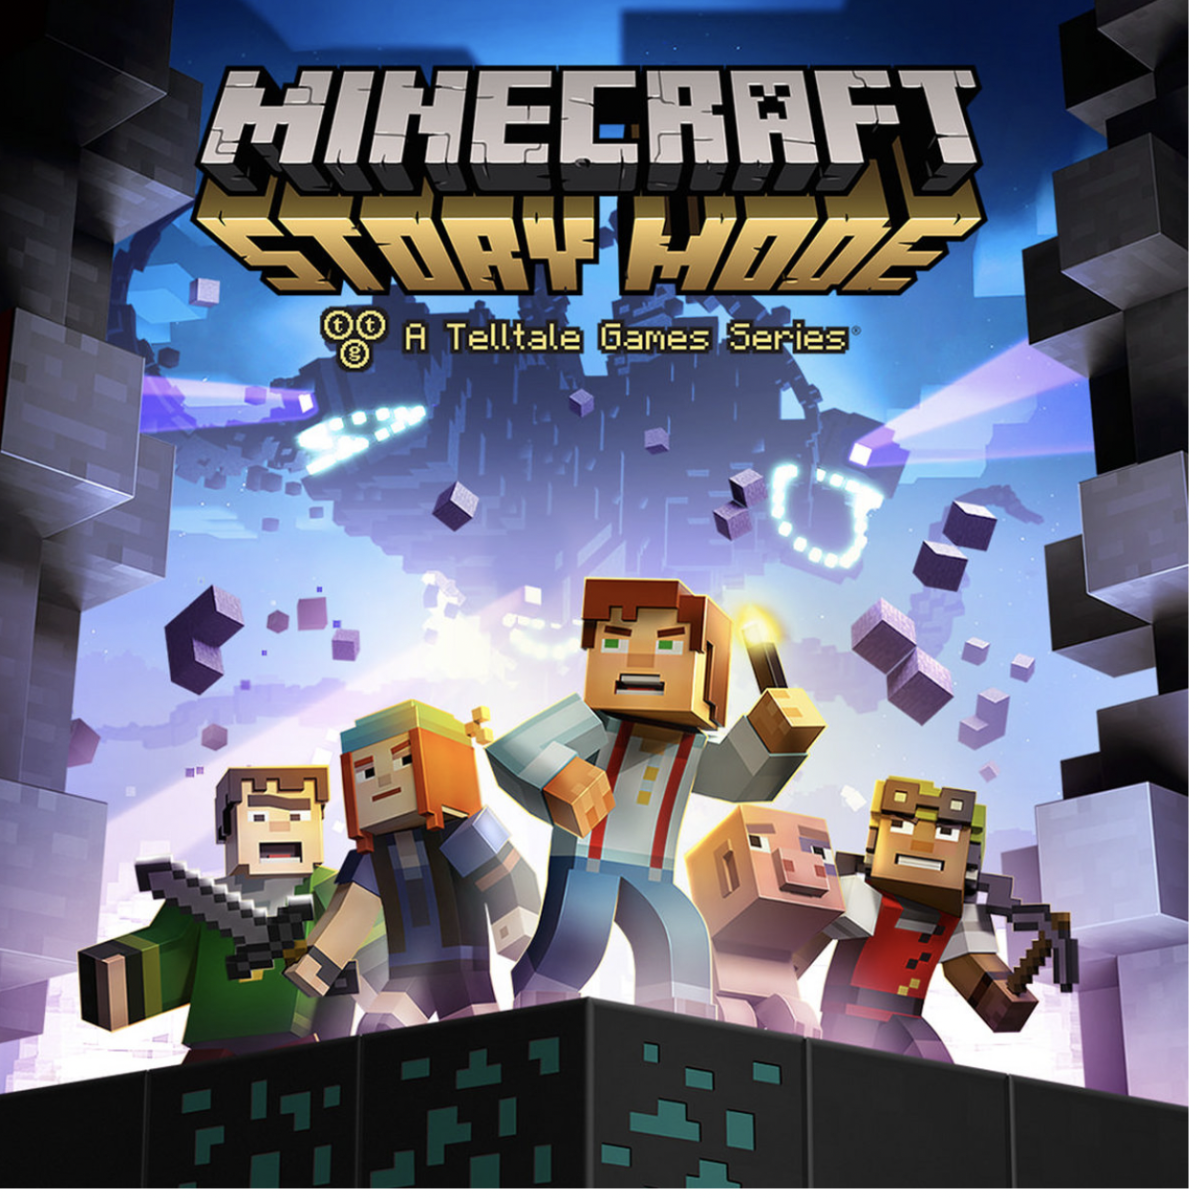  Like Minecraft, Minecraft Story Mode is an adventure story game set in the Minecraft universe. The important line is that the decisions you make in the game affect the outcome of the story. 

